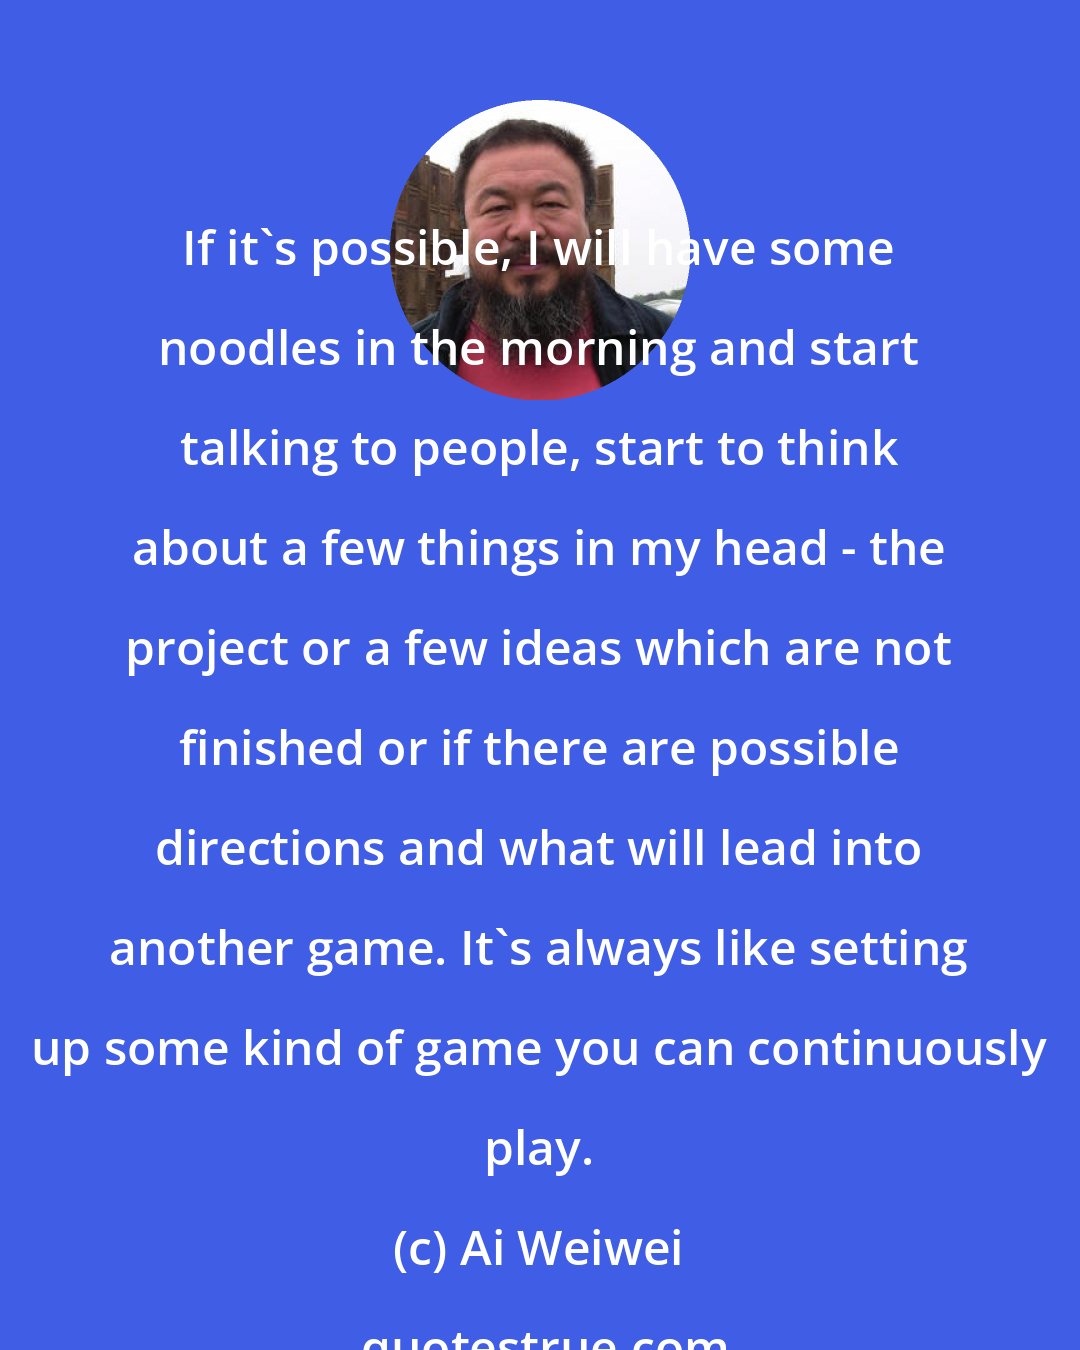 Ai Weiwei: If it's possible, I will have some noodles in the morning and start talking to people, start to think about a few things in my head - the project or a few ideas which are not finished or if there are possible directions and what will lead into another game. It's always like setting up some kind of game you can continuously play.